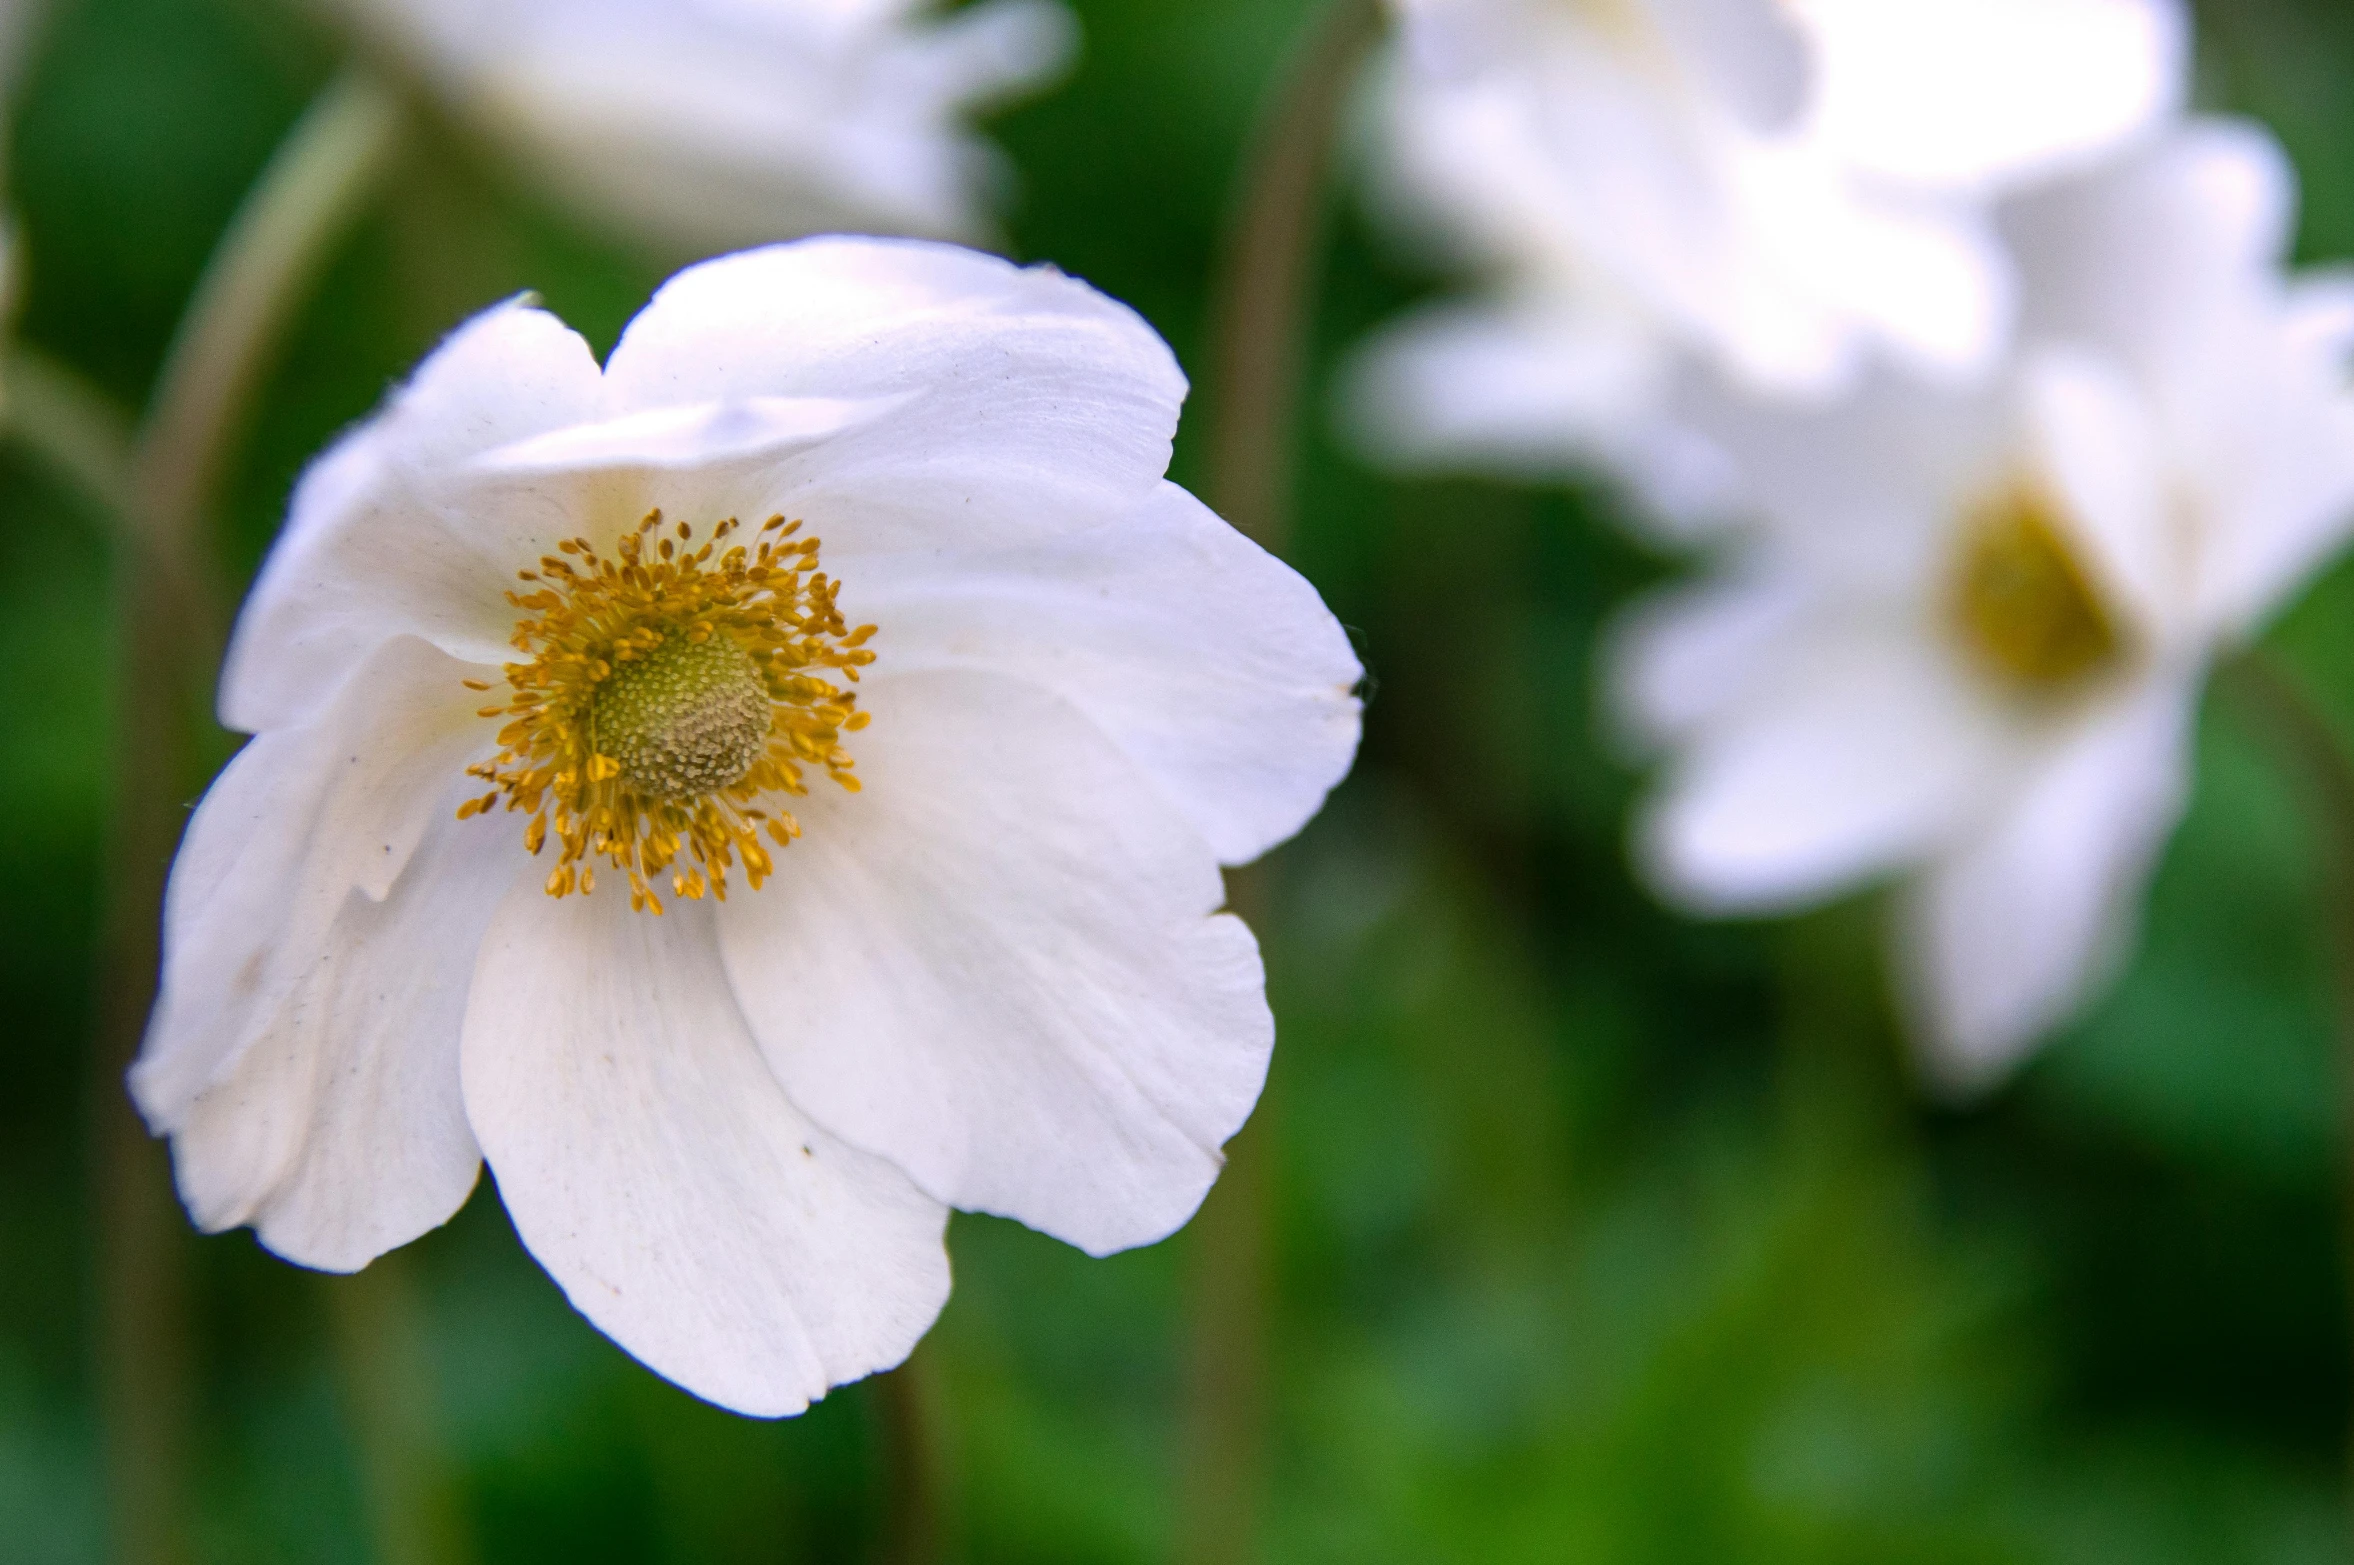 a close up of a white flower with a yellow center, by David Simpson, unsplash, arts and crafts movement, anemone, in a cottagecore flower garden, medium format, pale milky white porcelain skin